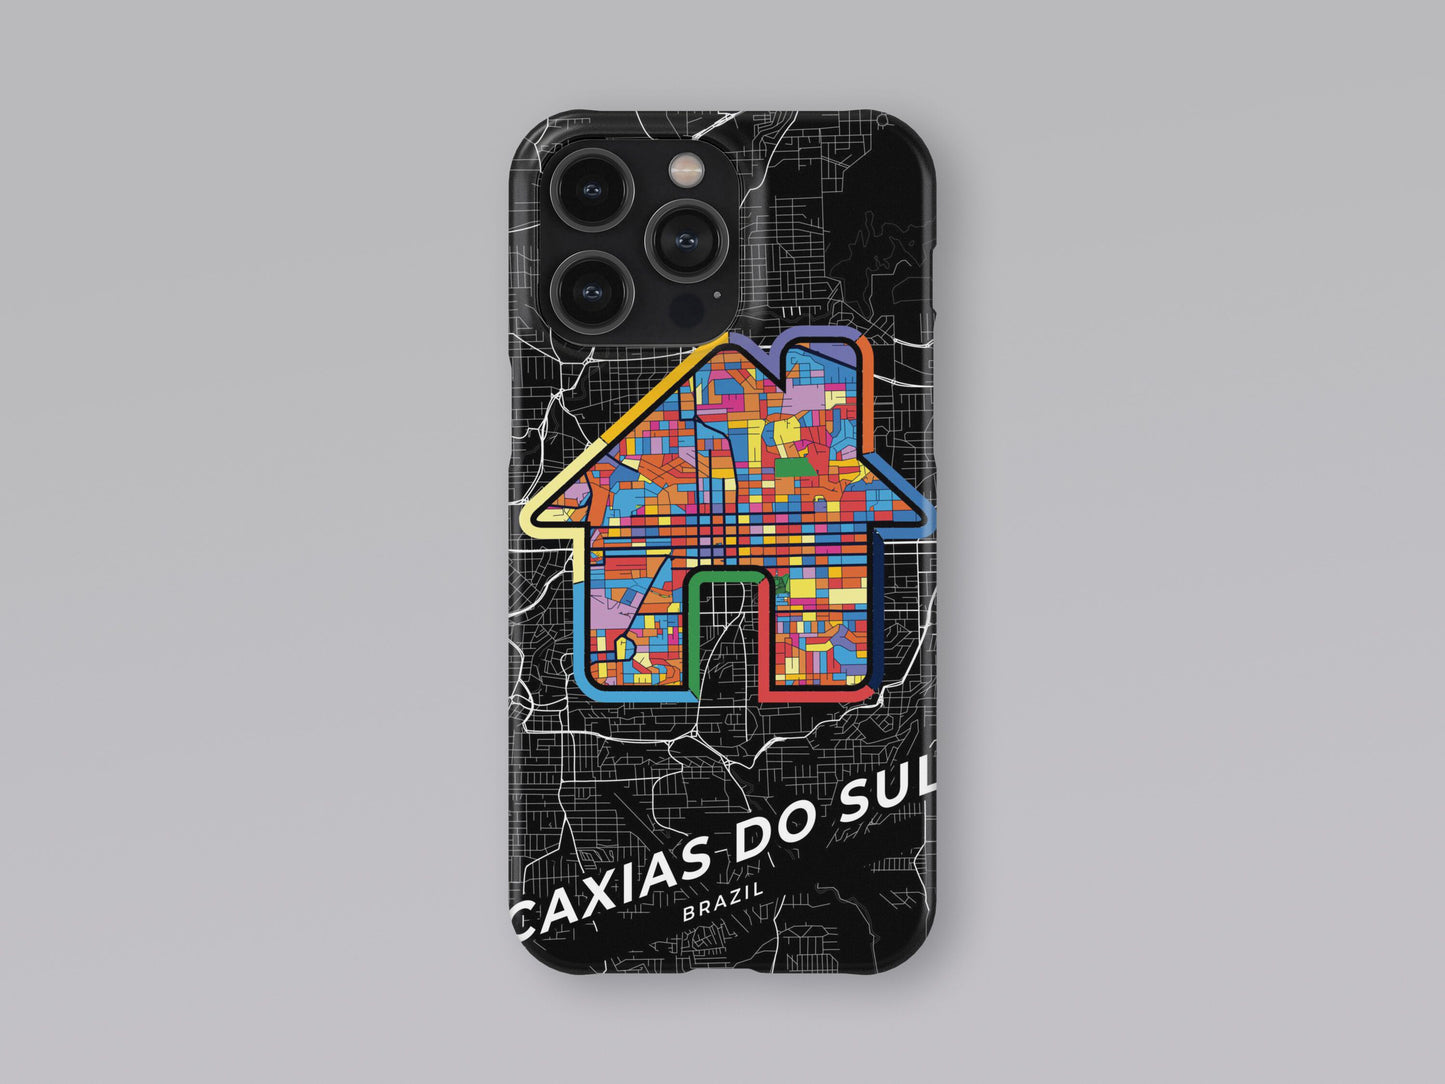 Caxias Do Sul Brazil slim phone case with colorful icon. Birthday, wedding or housewarming gift. Couple match cases. 3